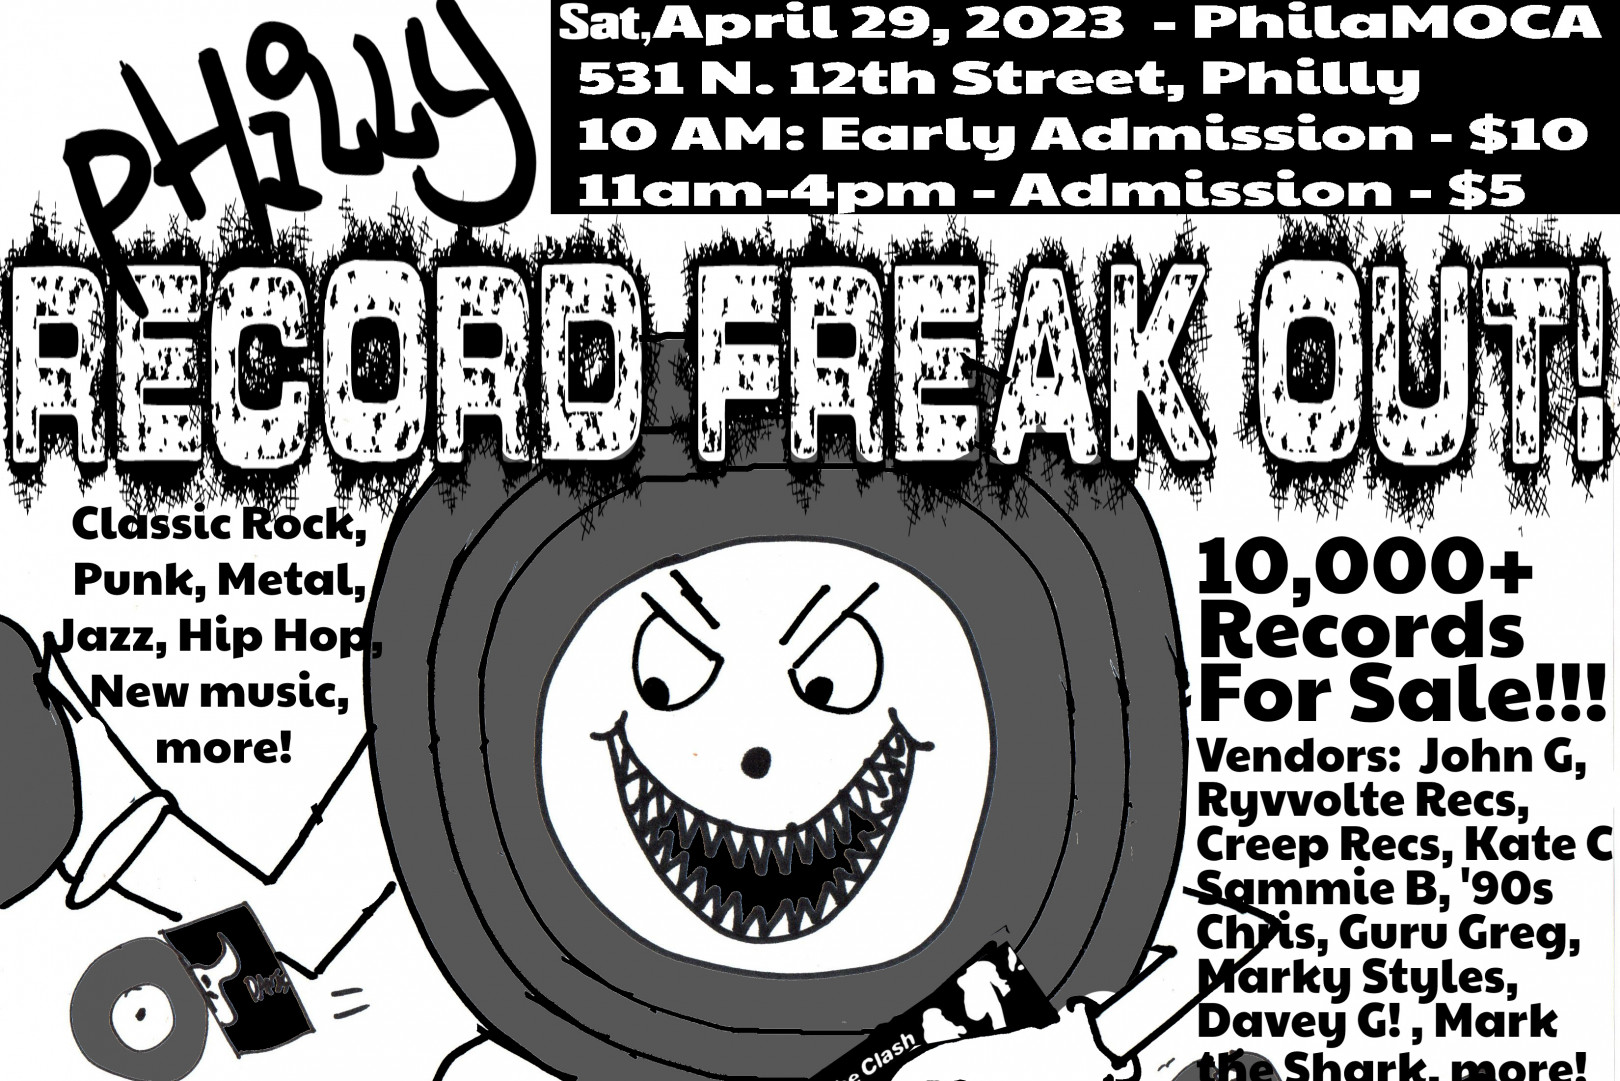 Punknews is throwing a vinyl swap in Philly on April 29!